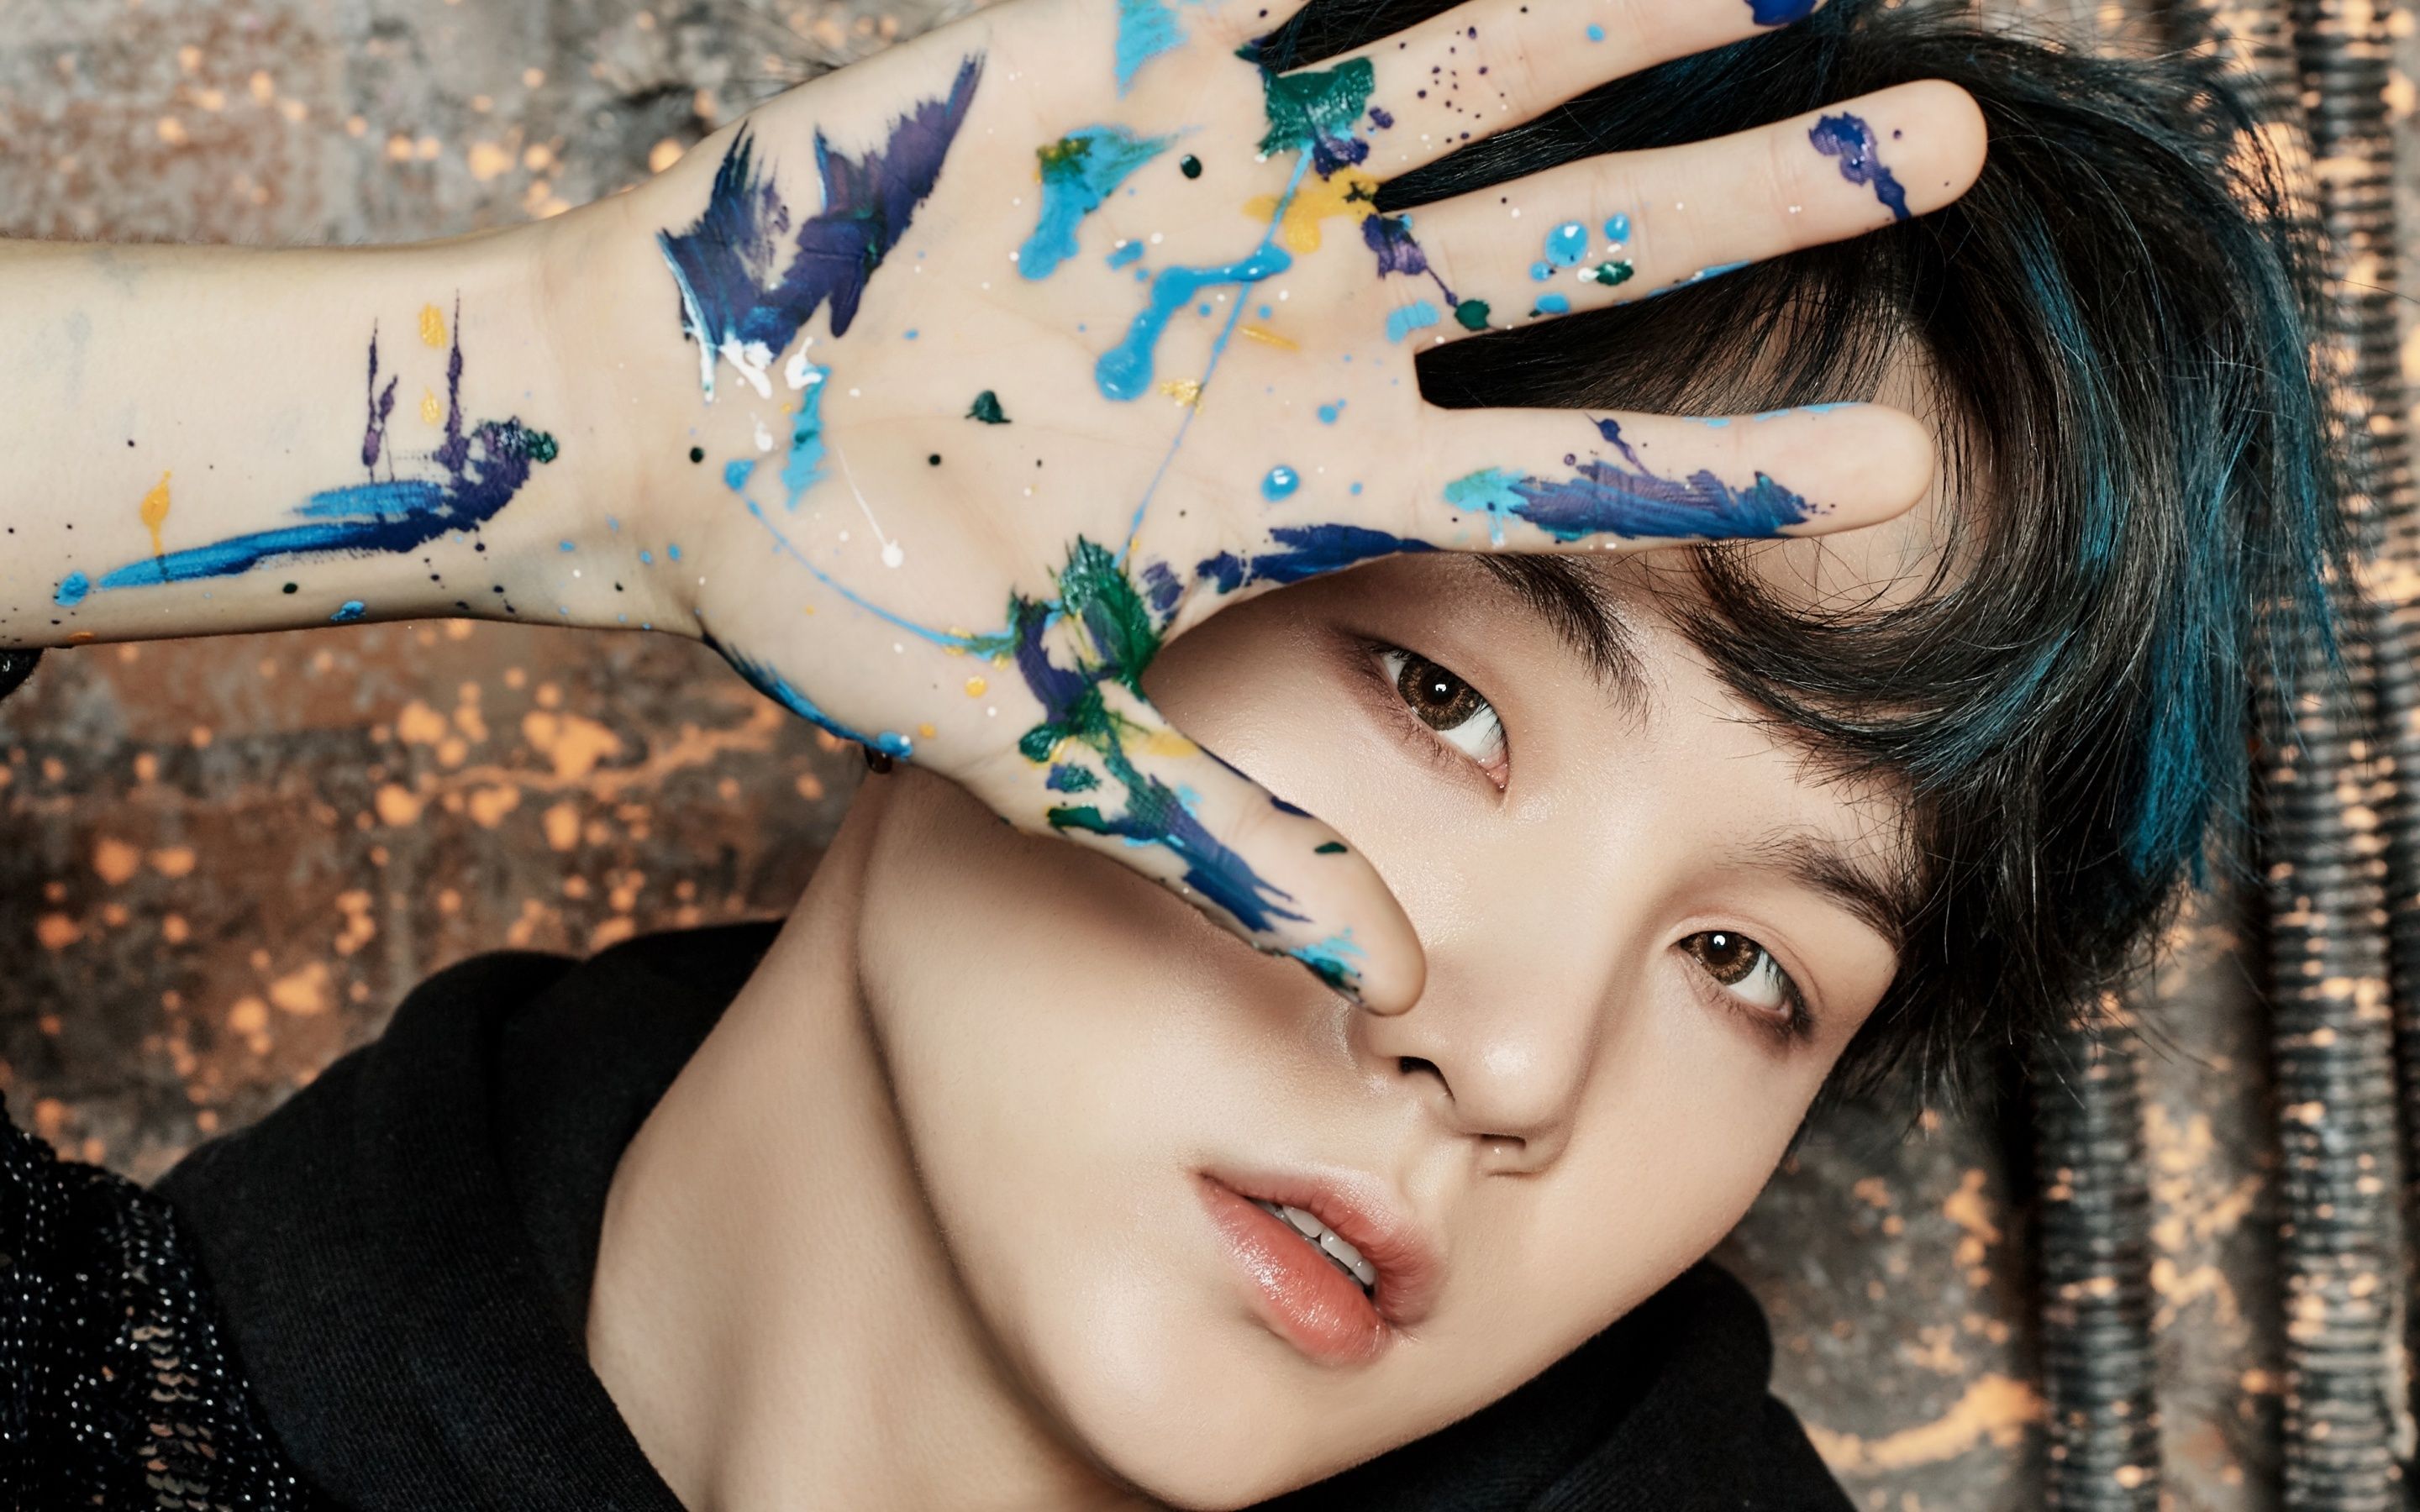 A young man with blue hair and paint on his hands - Suga